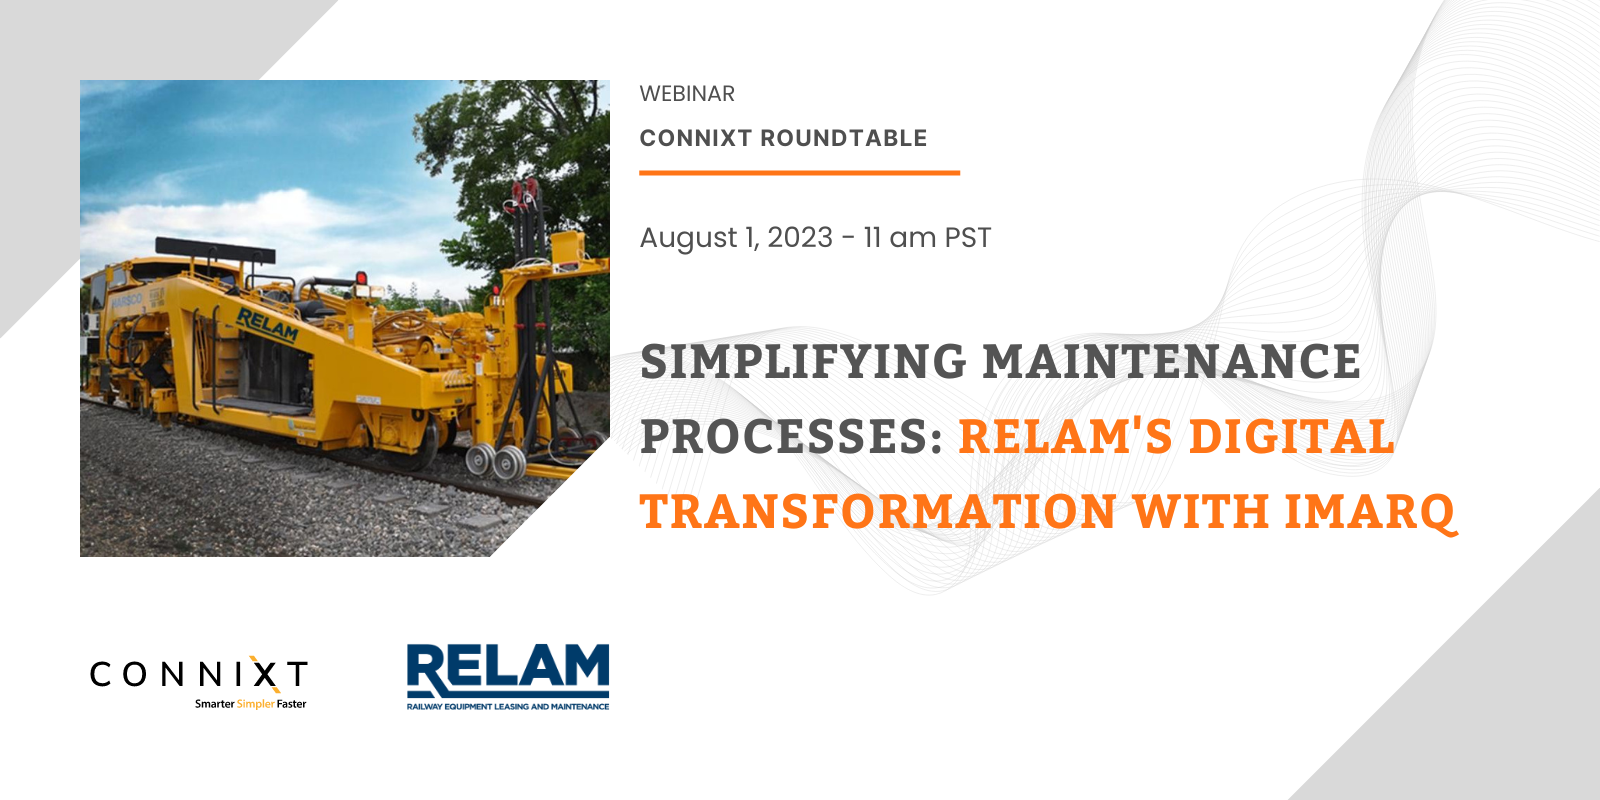 Simplifying Maintenance Processes: RELAM's Digital Transformation with iMarq